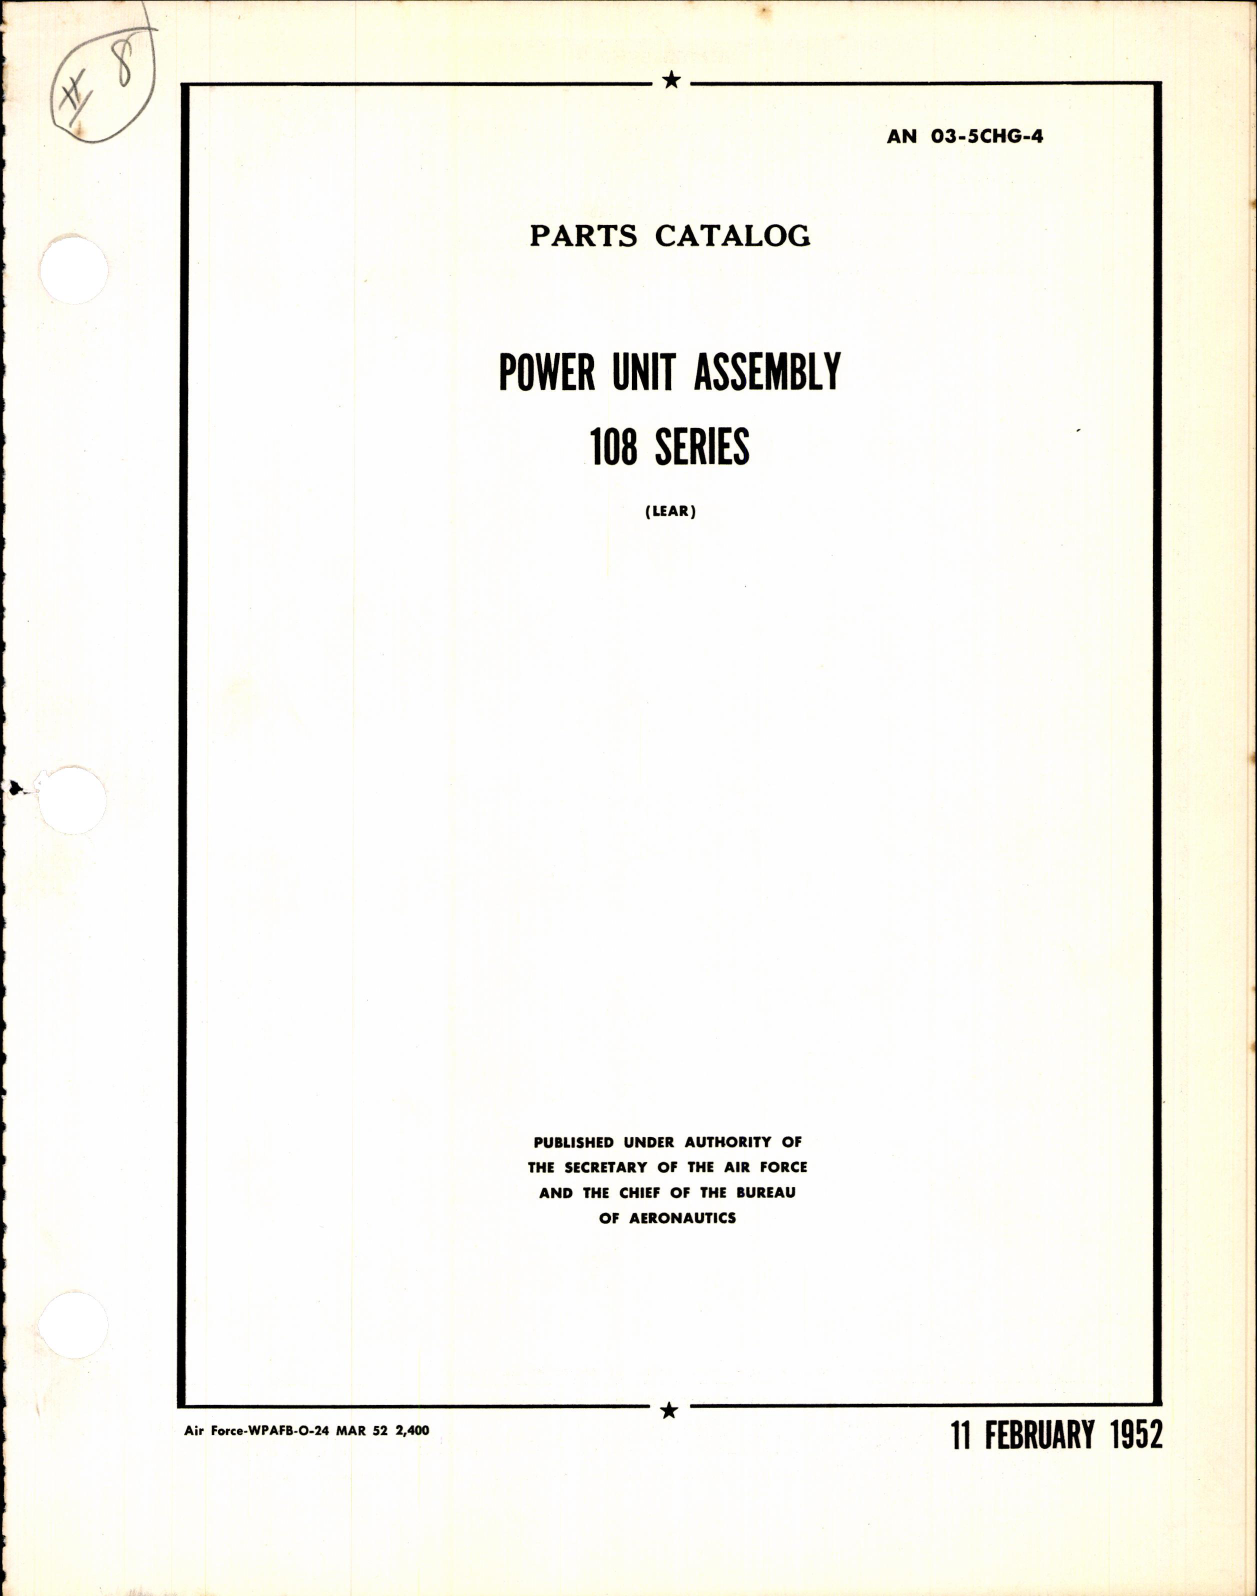 Sample page 1 from AirCorps Library document: Parts Catalog for Power Unit Assembly 108 Series